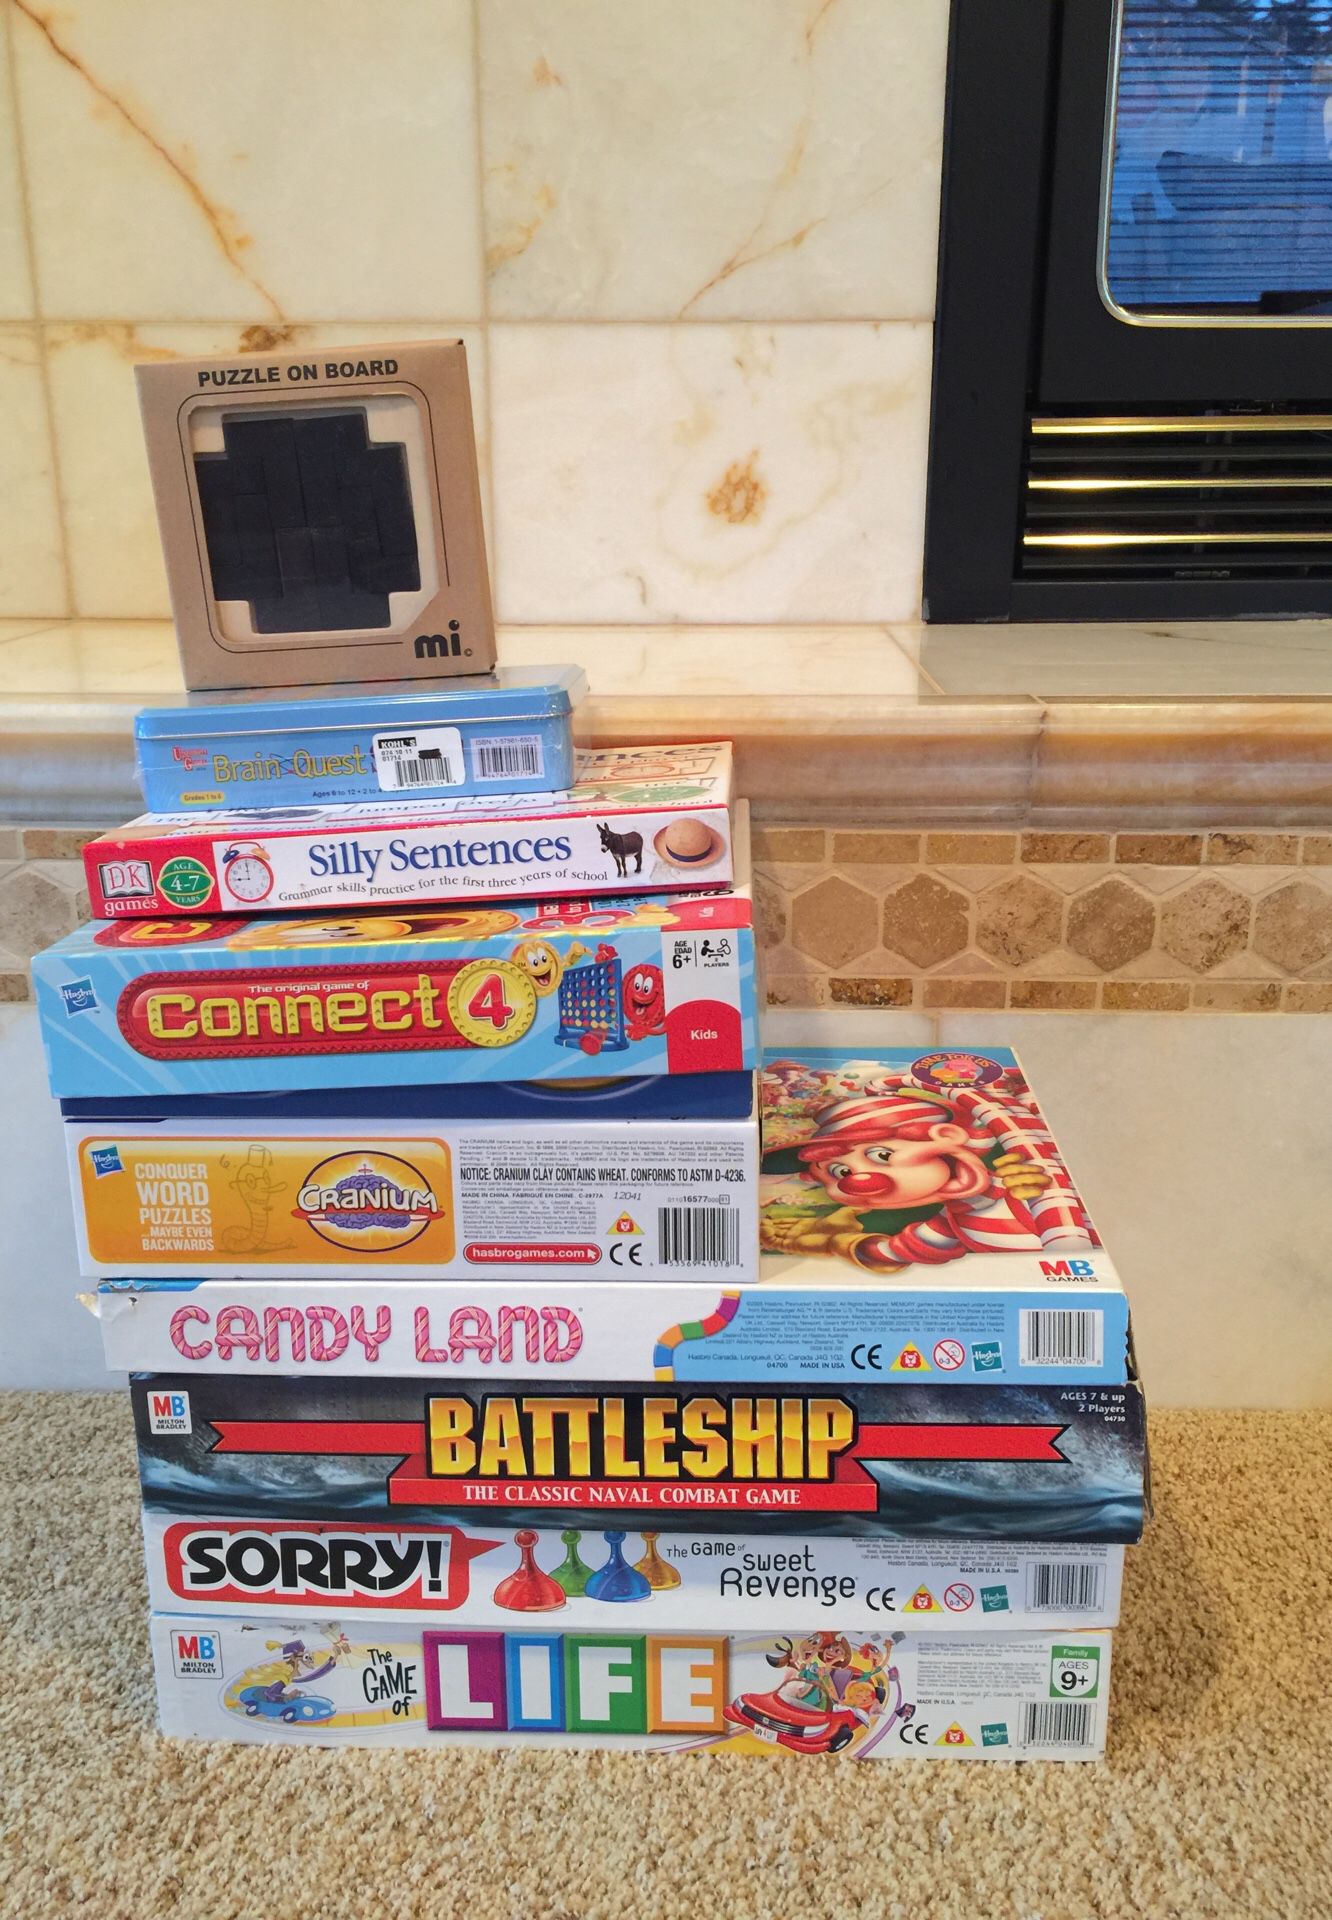 Board Games: Life, Sorry, Battleship, Candy Land, Cranium, Connect 4, Silly Sentences, Brain Quest, Puzzle On Board